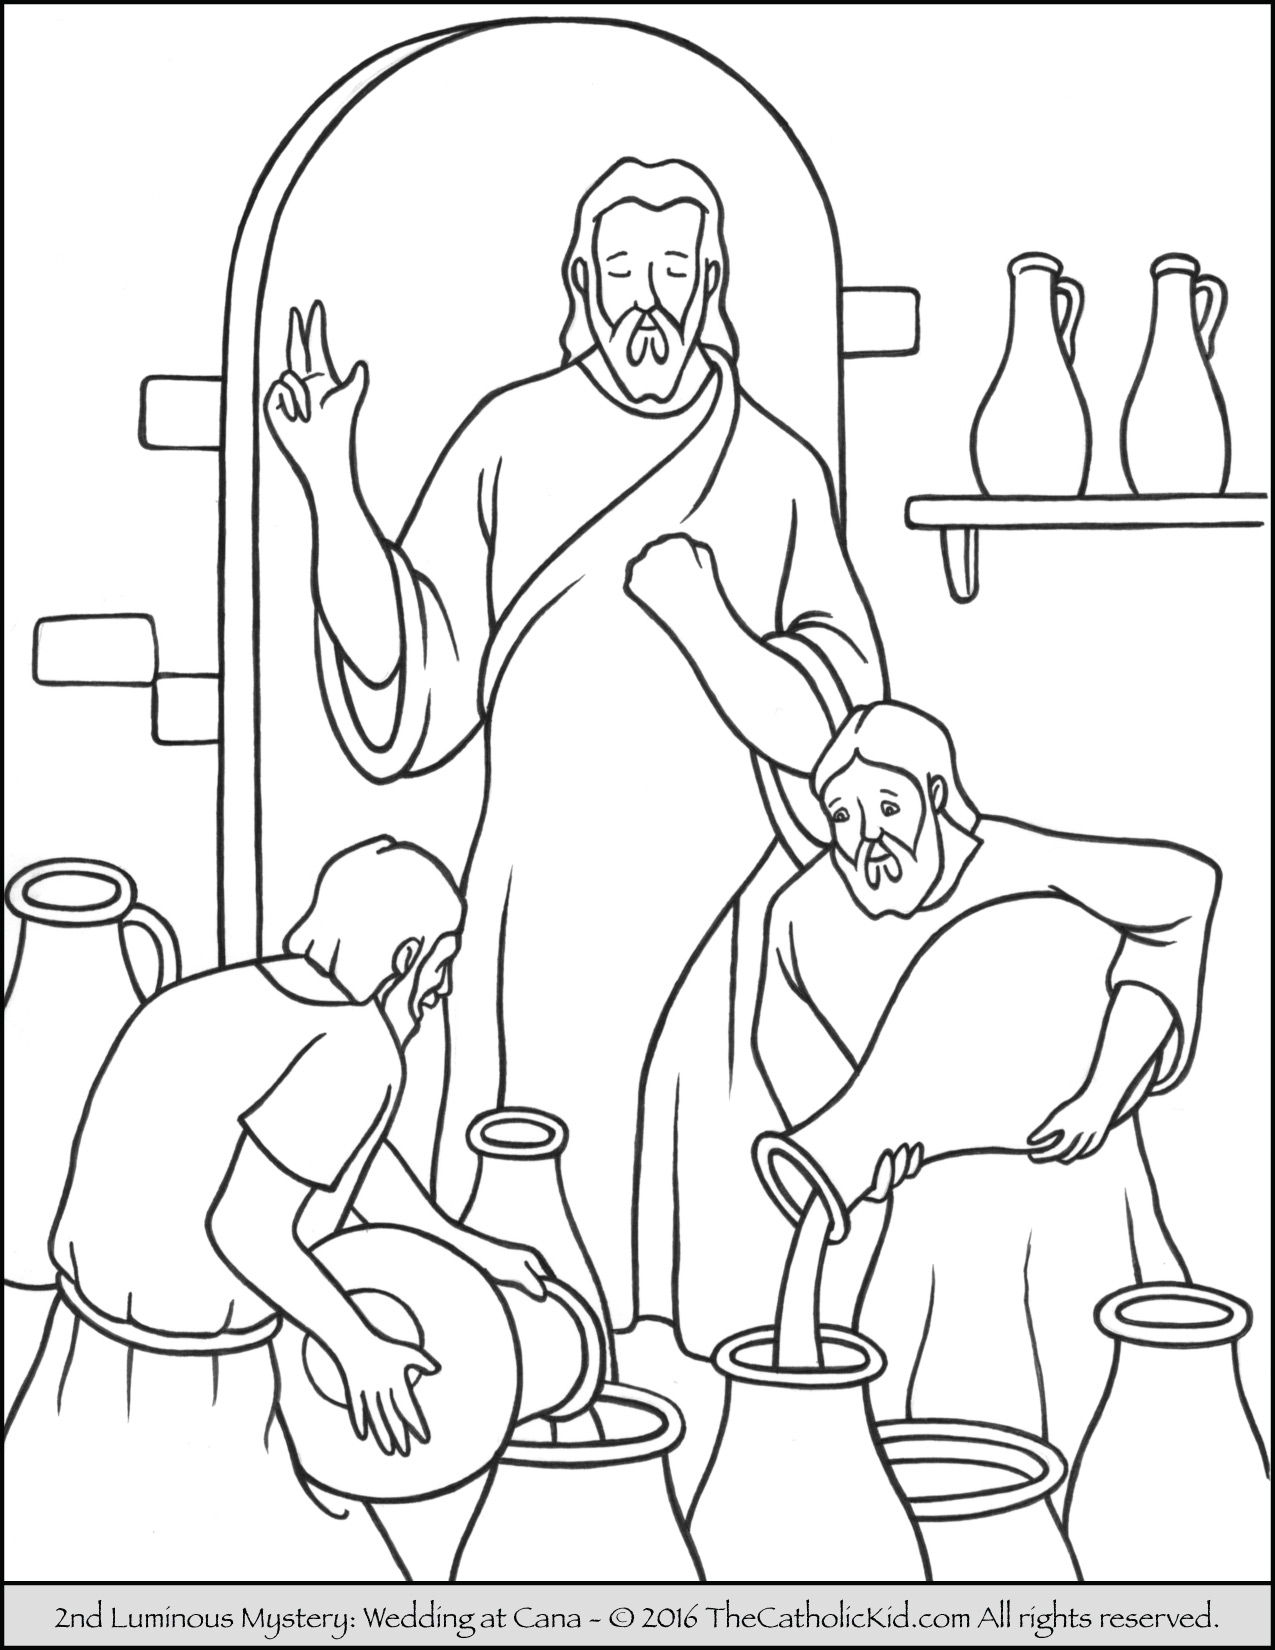 45 Jesus Turns Water Into Wine Coloring Page